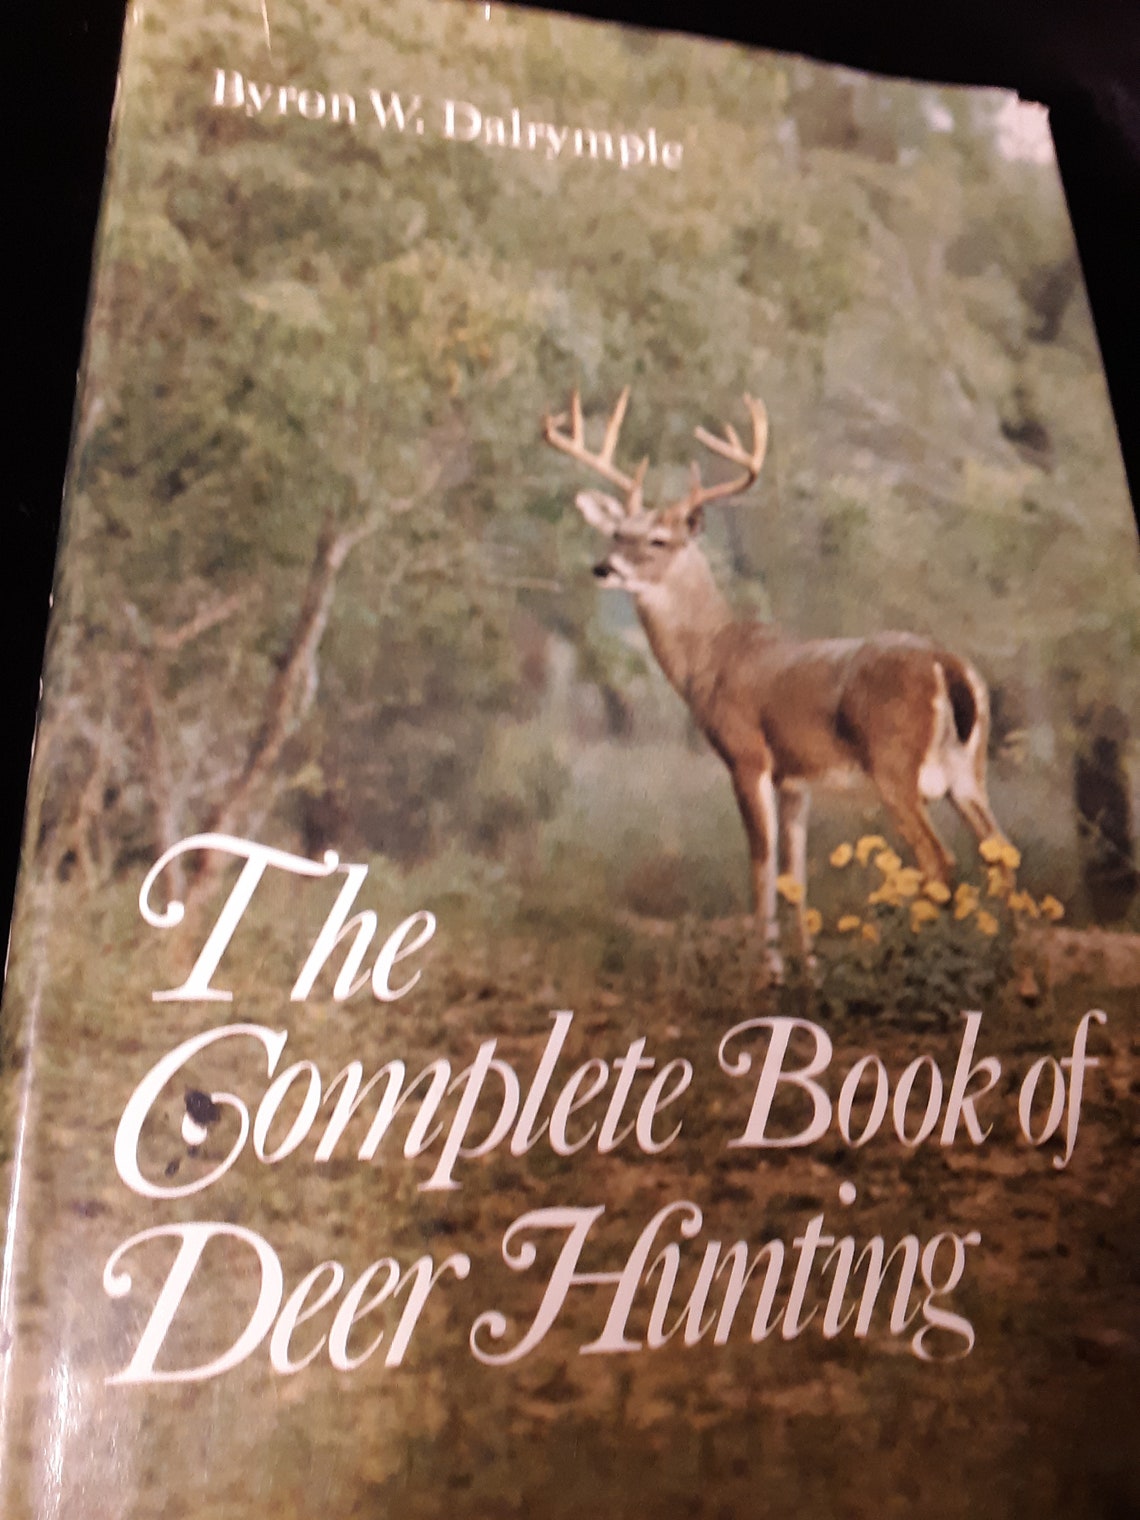 The Complete Book of Deer Hunting by Byron W. Dalrymple | Etsy